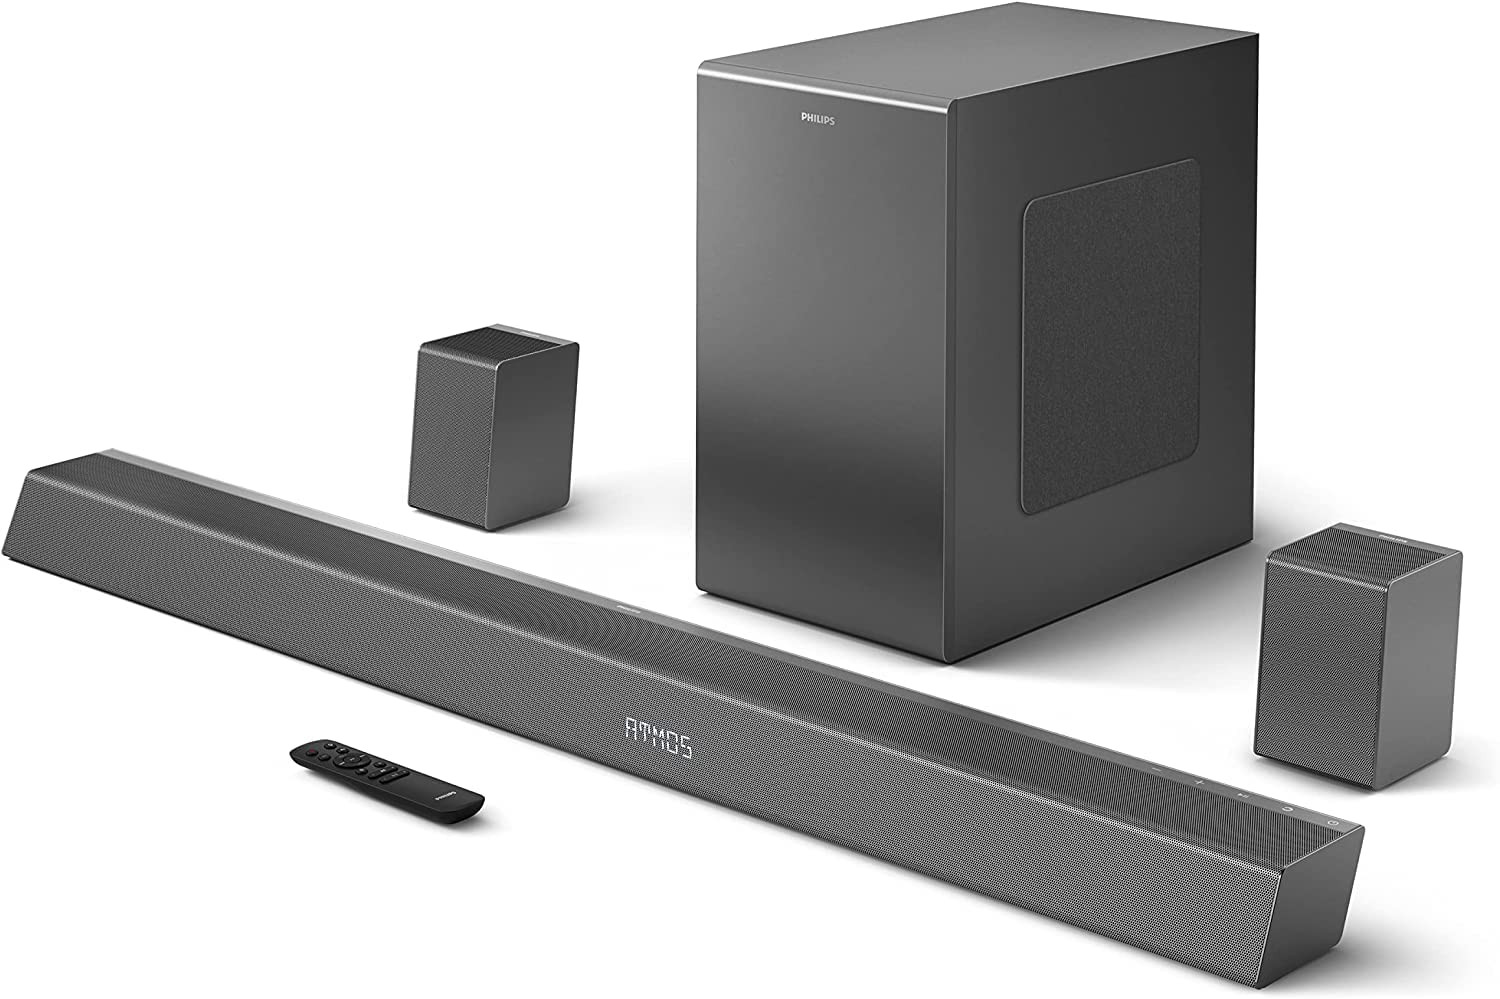 Philips Soundbar TAB8967 71 Ch 512 Real Surround Dolby Atmos Wireless Subwoofer UP-Firing Speakers Wireless Rear Speakers AI Voice Assistant 780W Black